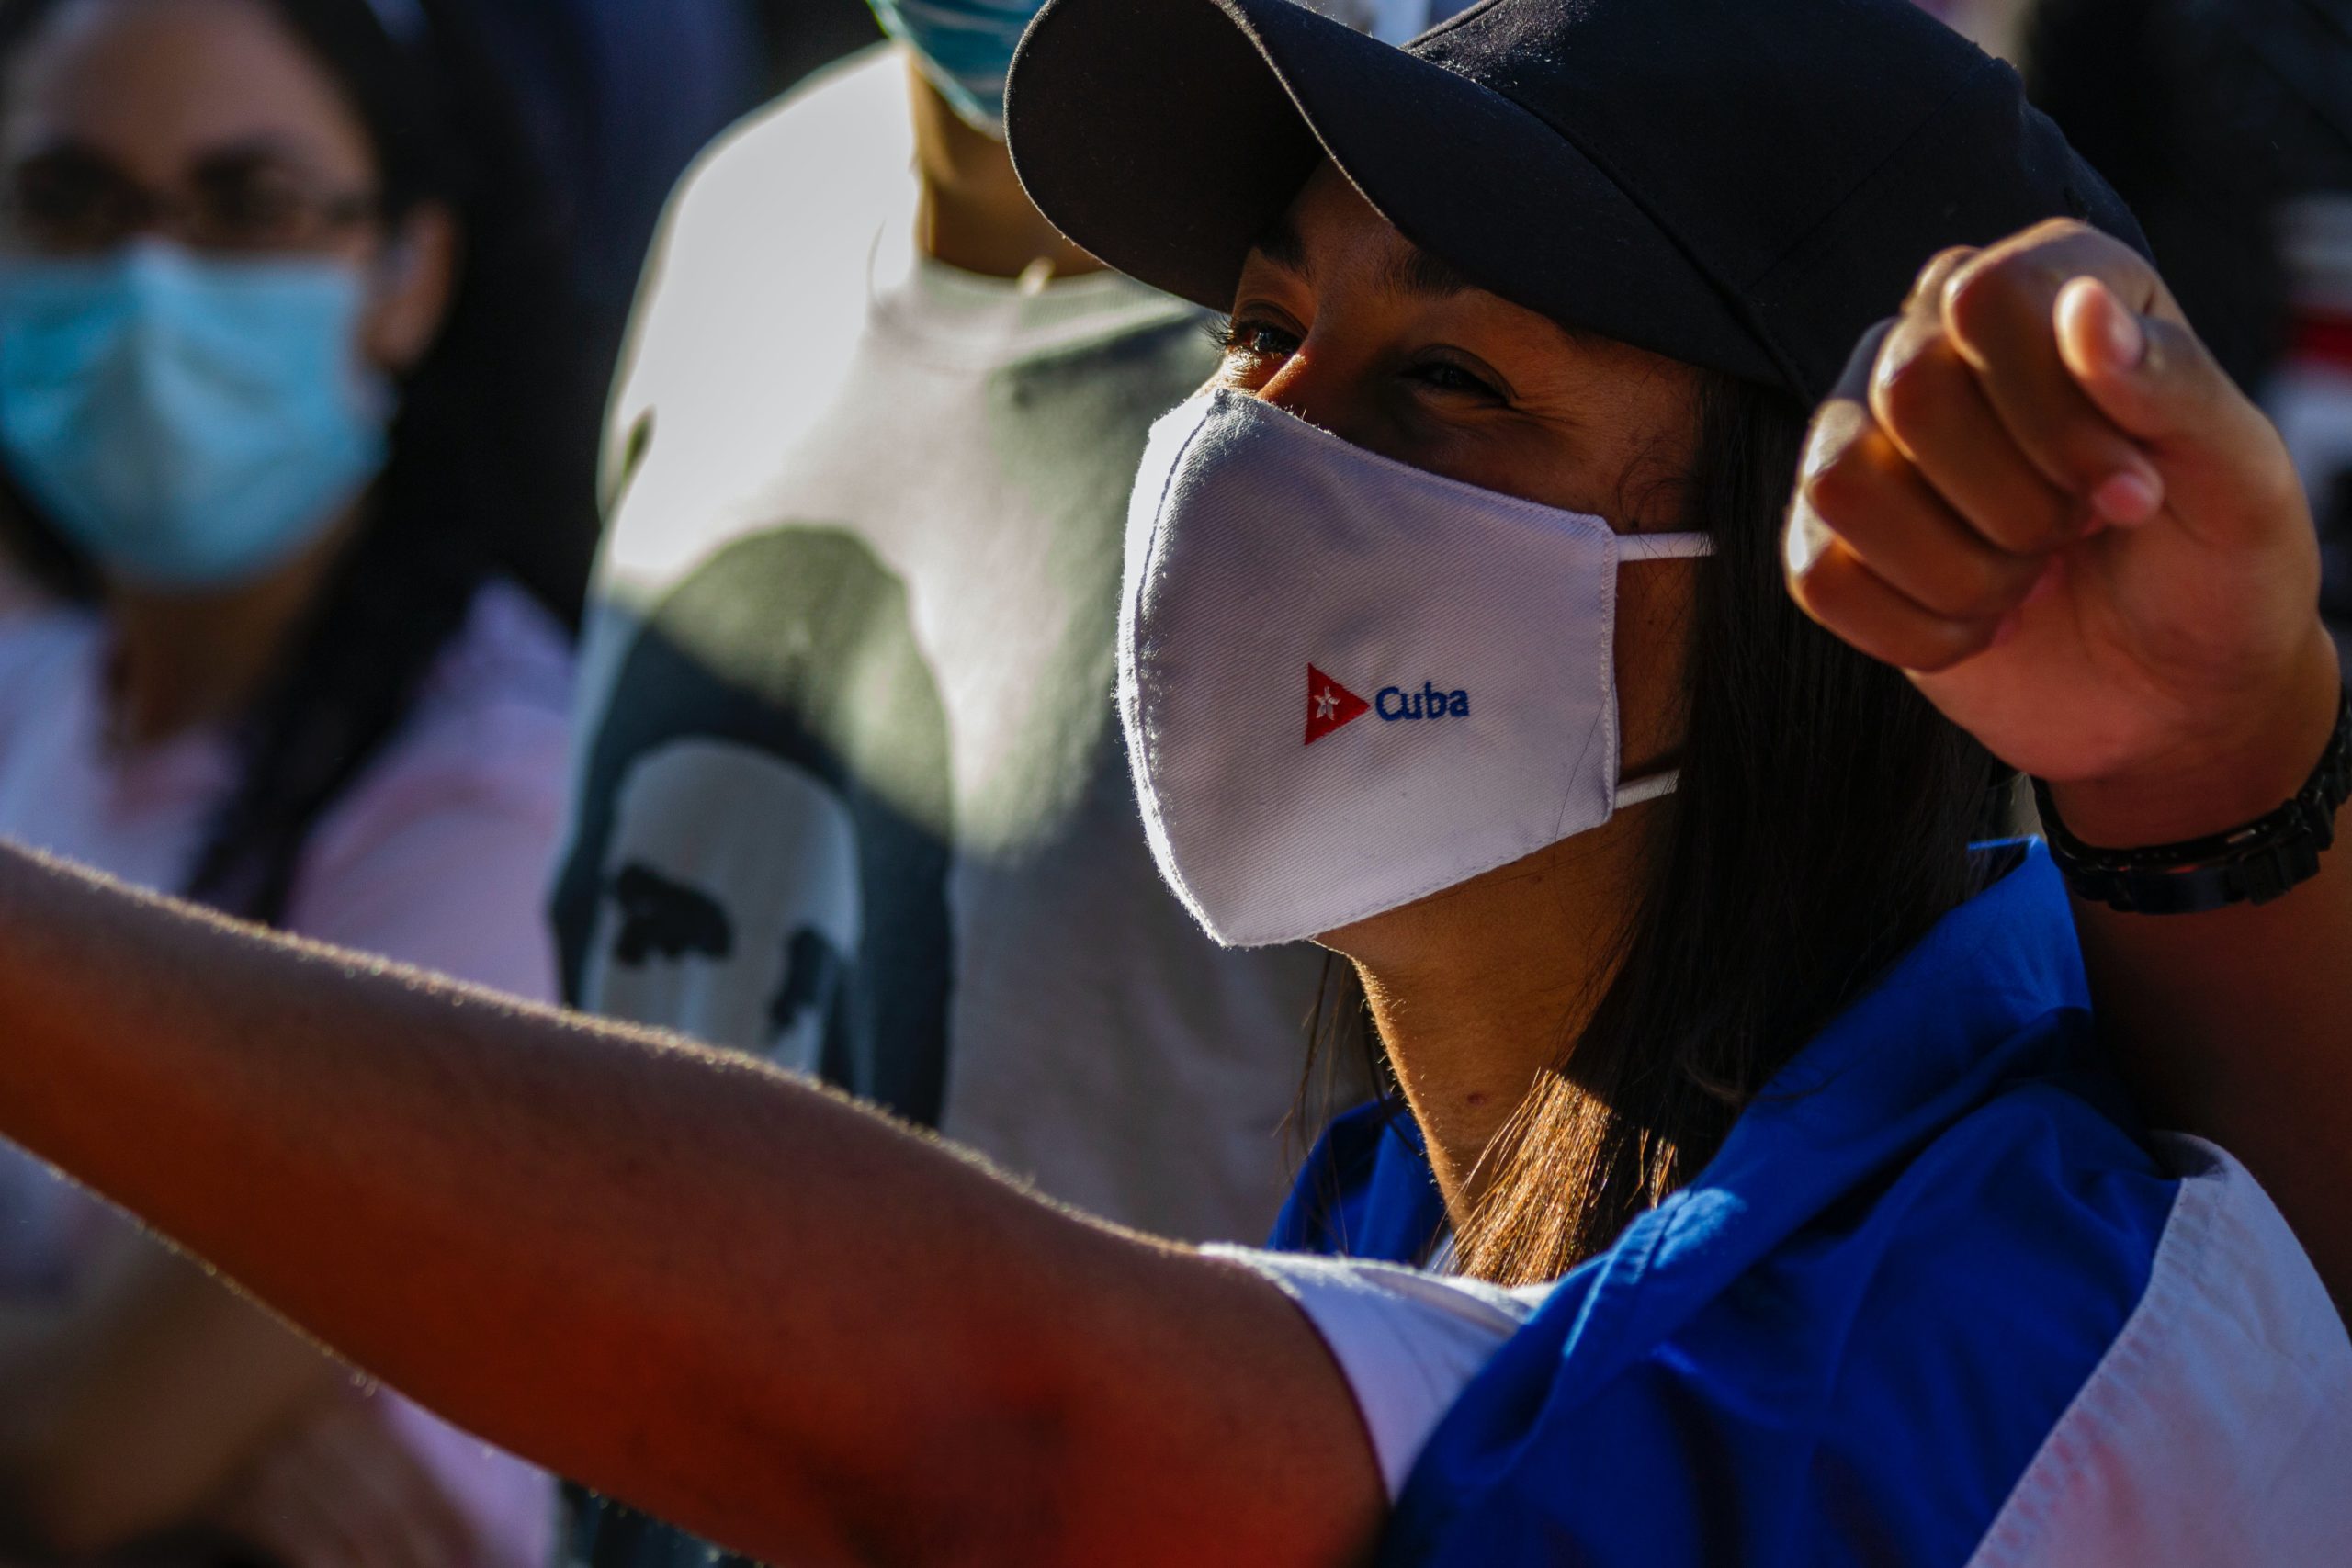 Woman wearing a mask with 'Cuba' embroidered on it